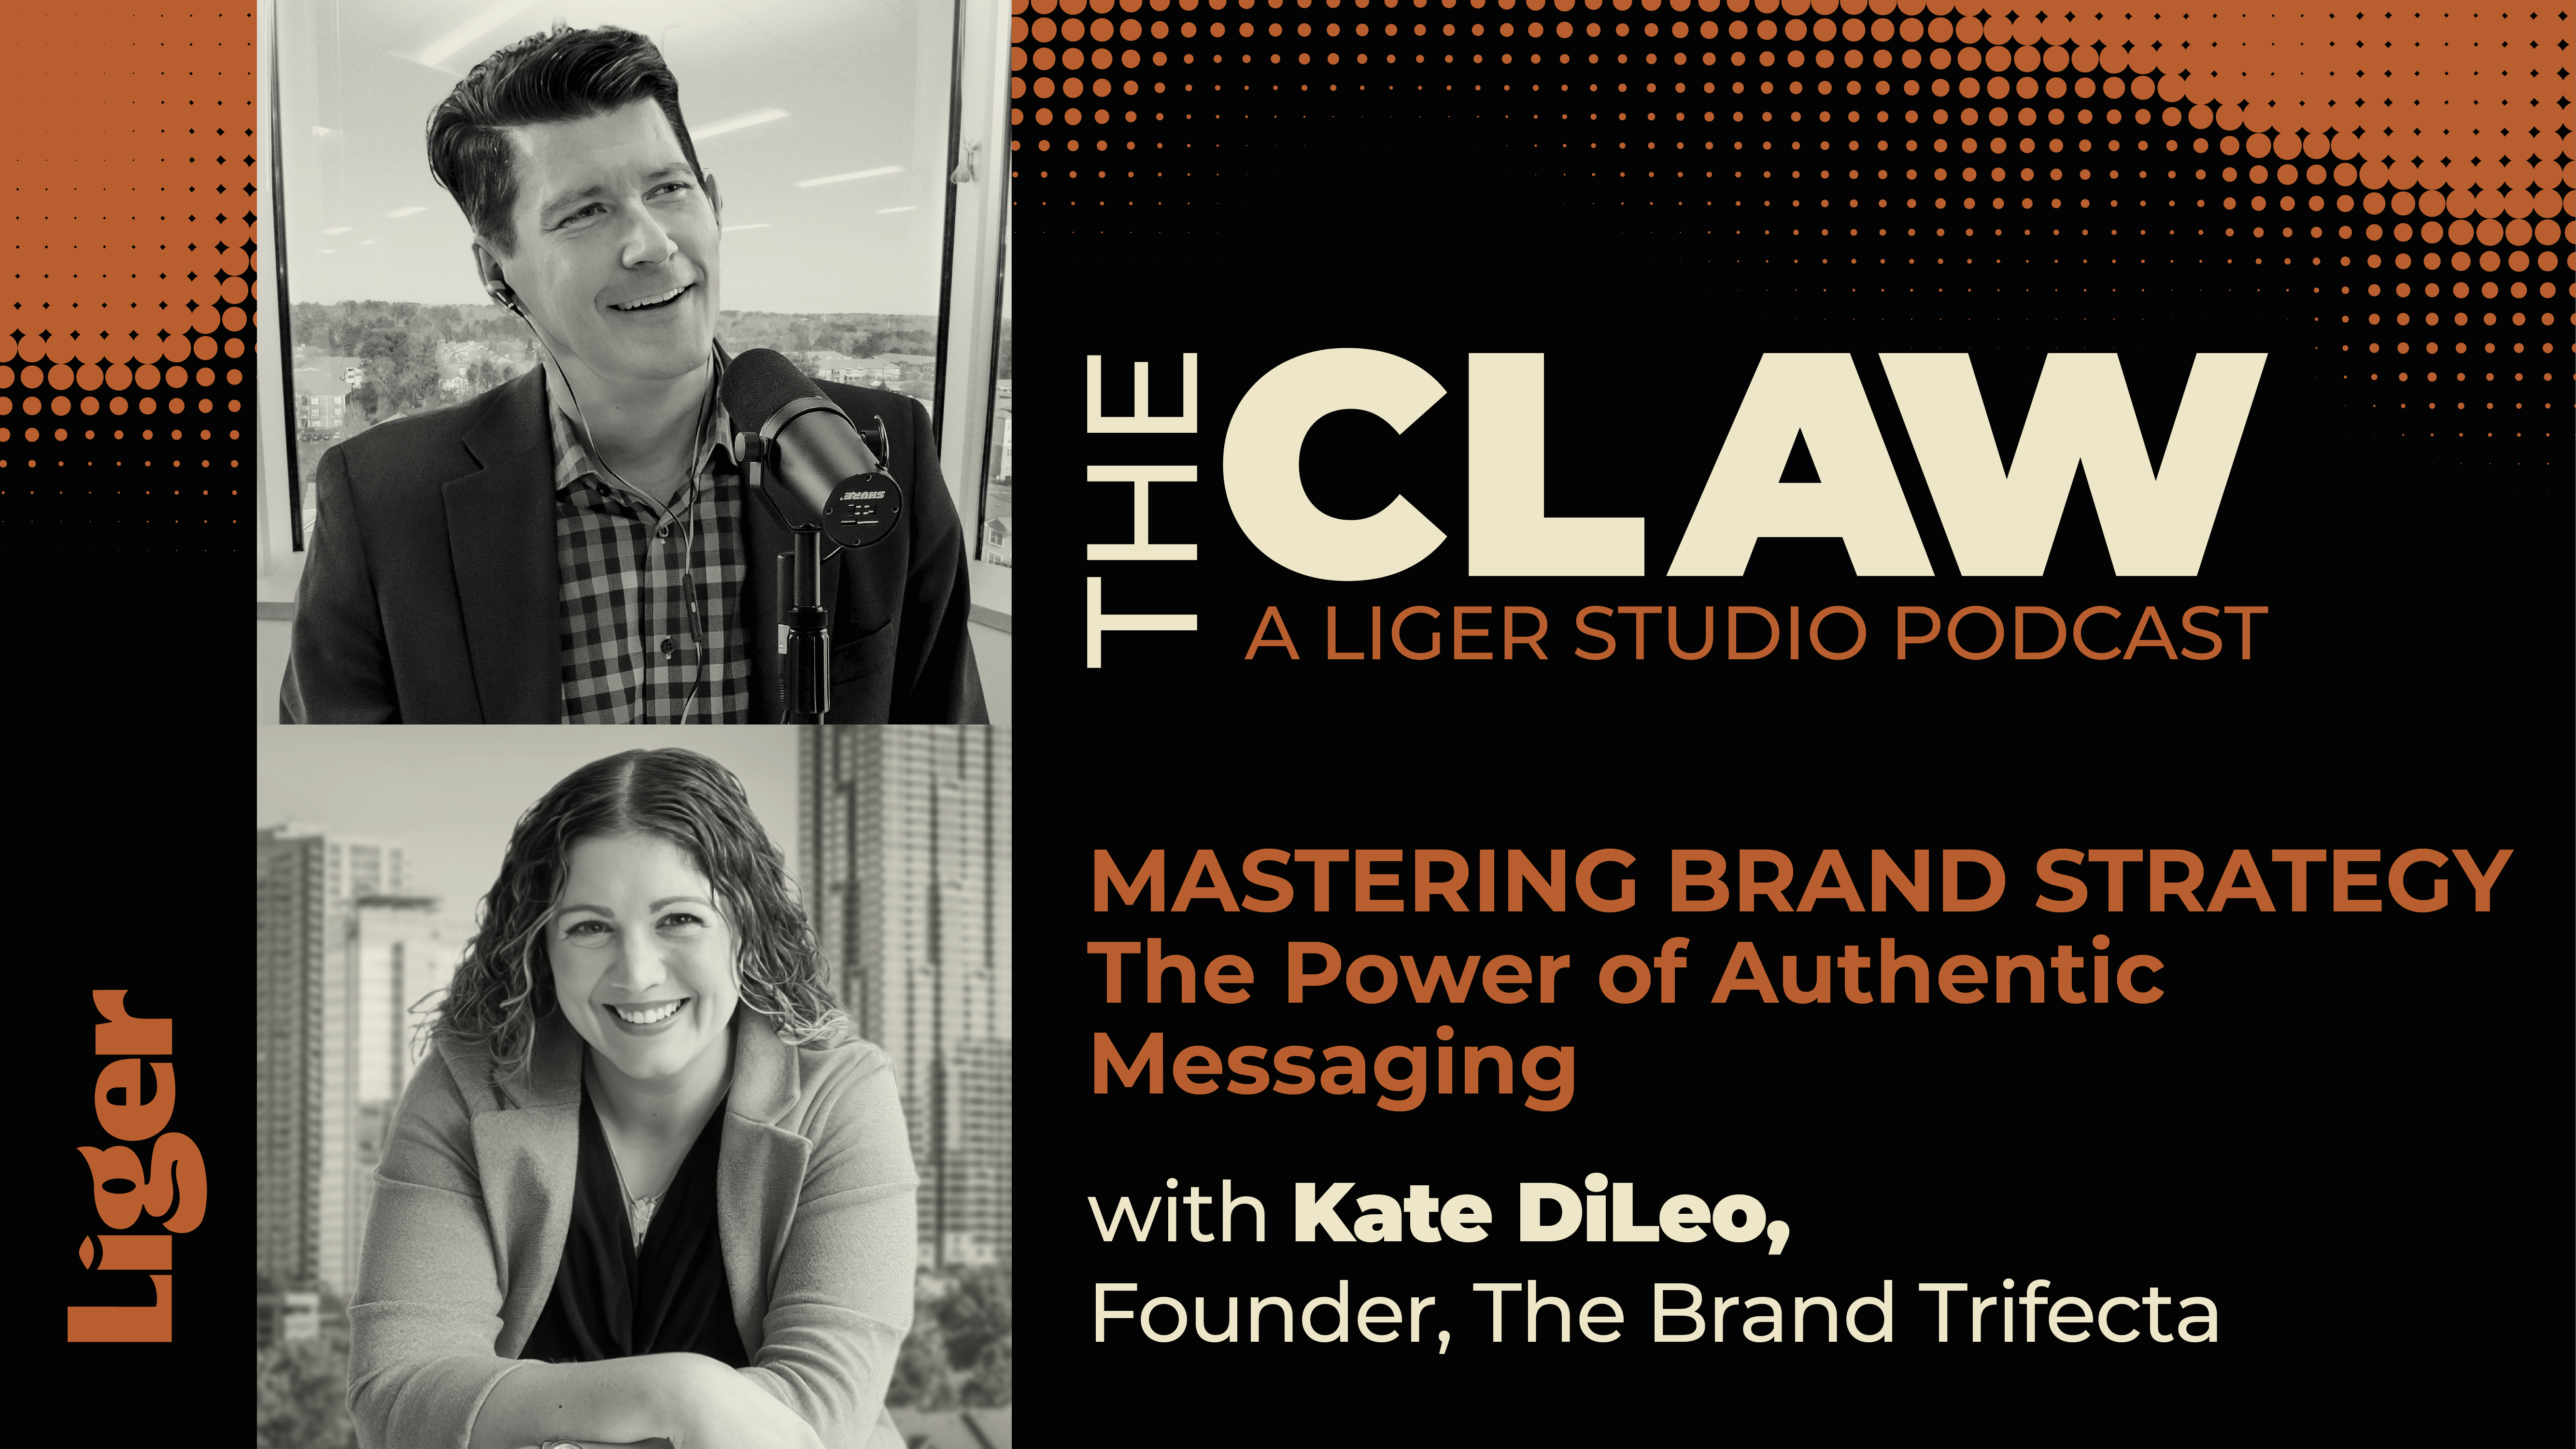 Mastering Brand Strategy with Kate DiLeo: The Power of Authentic Messaging